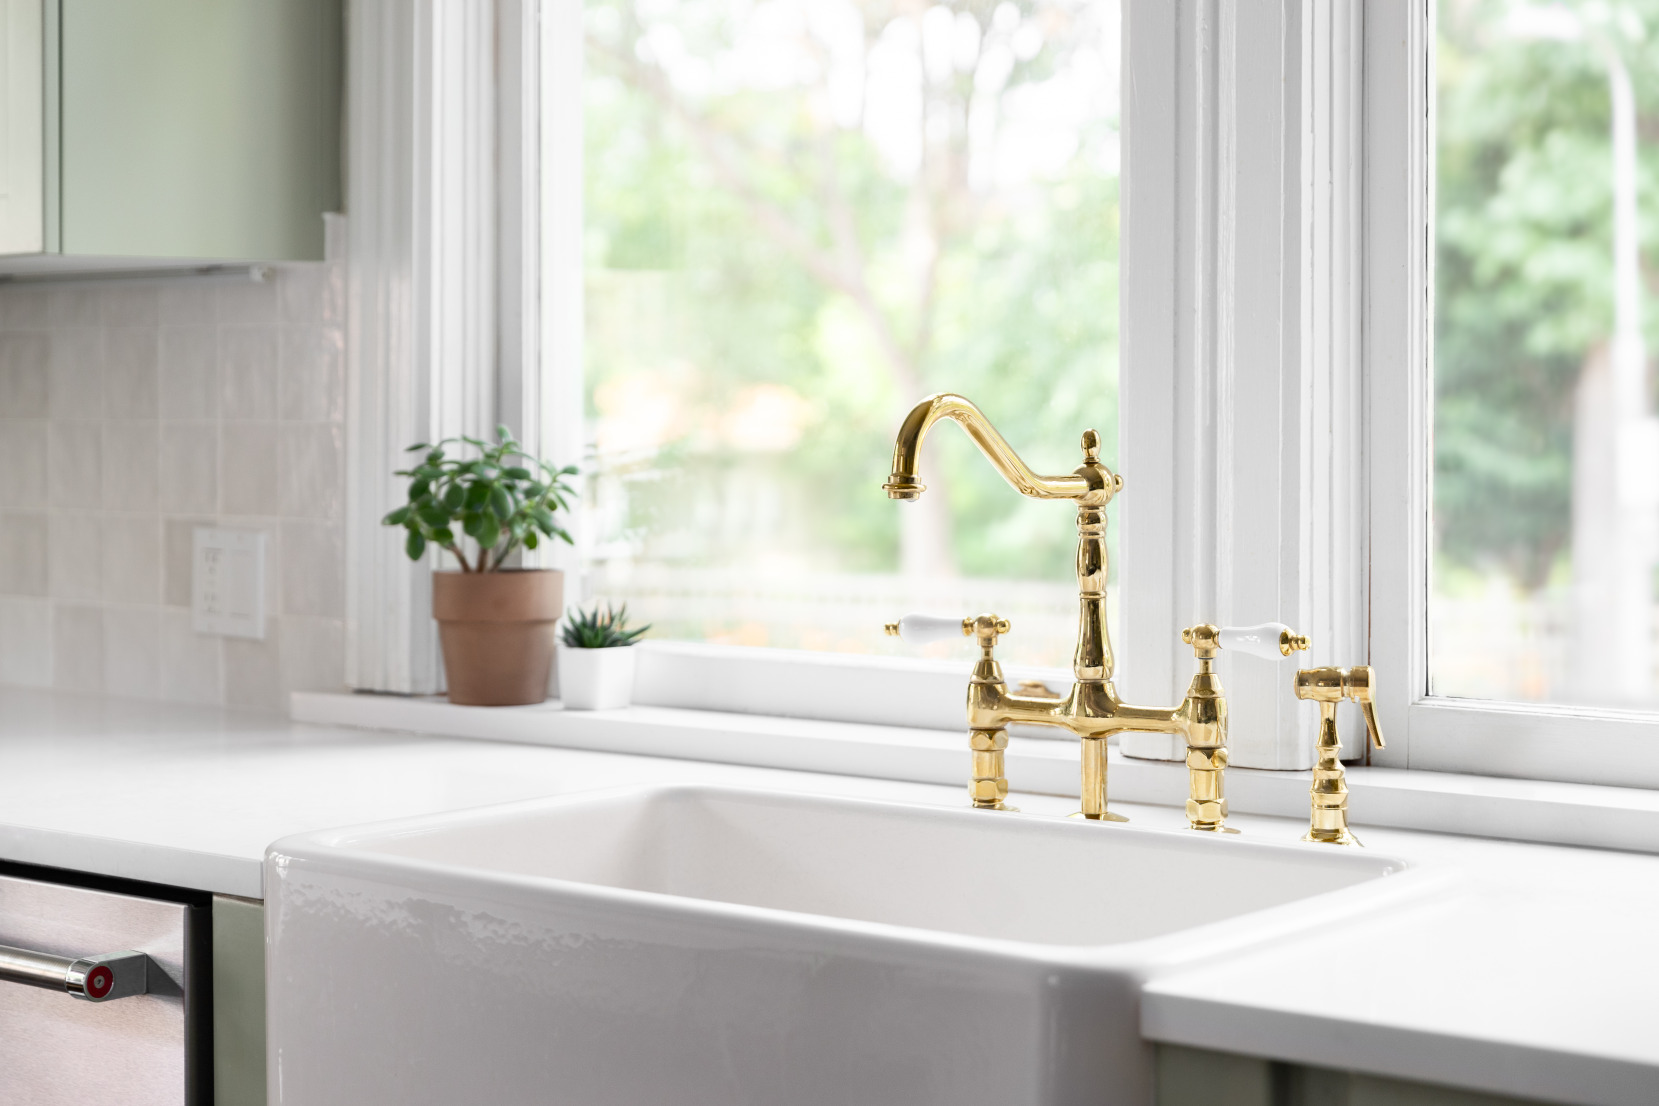 Gold faucet detail in a warm green kitchen